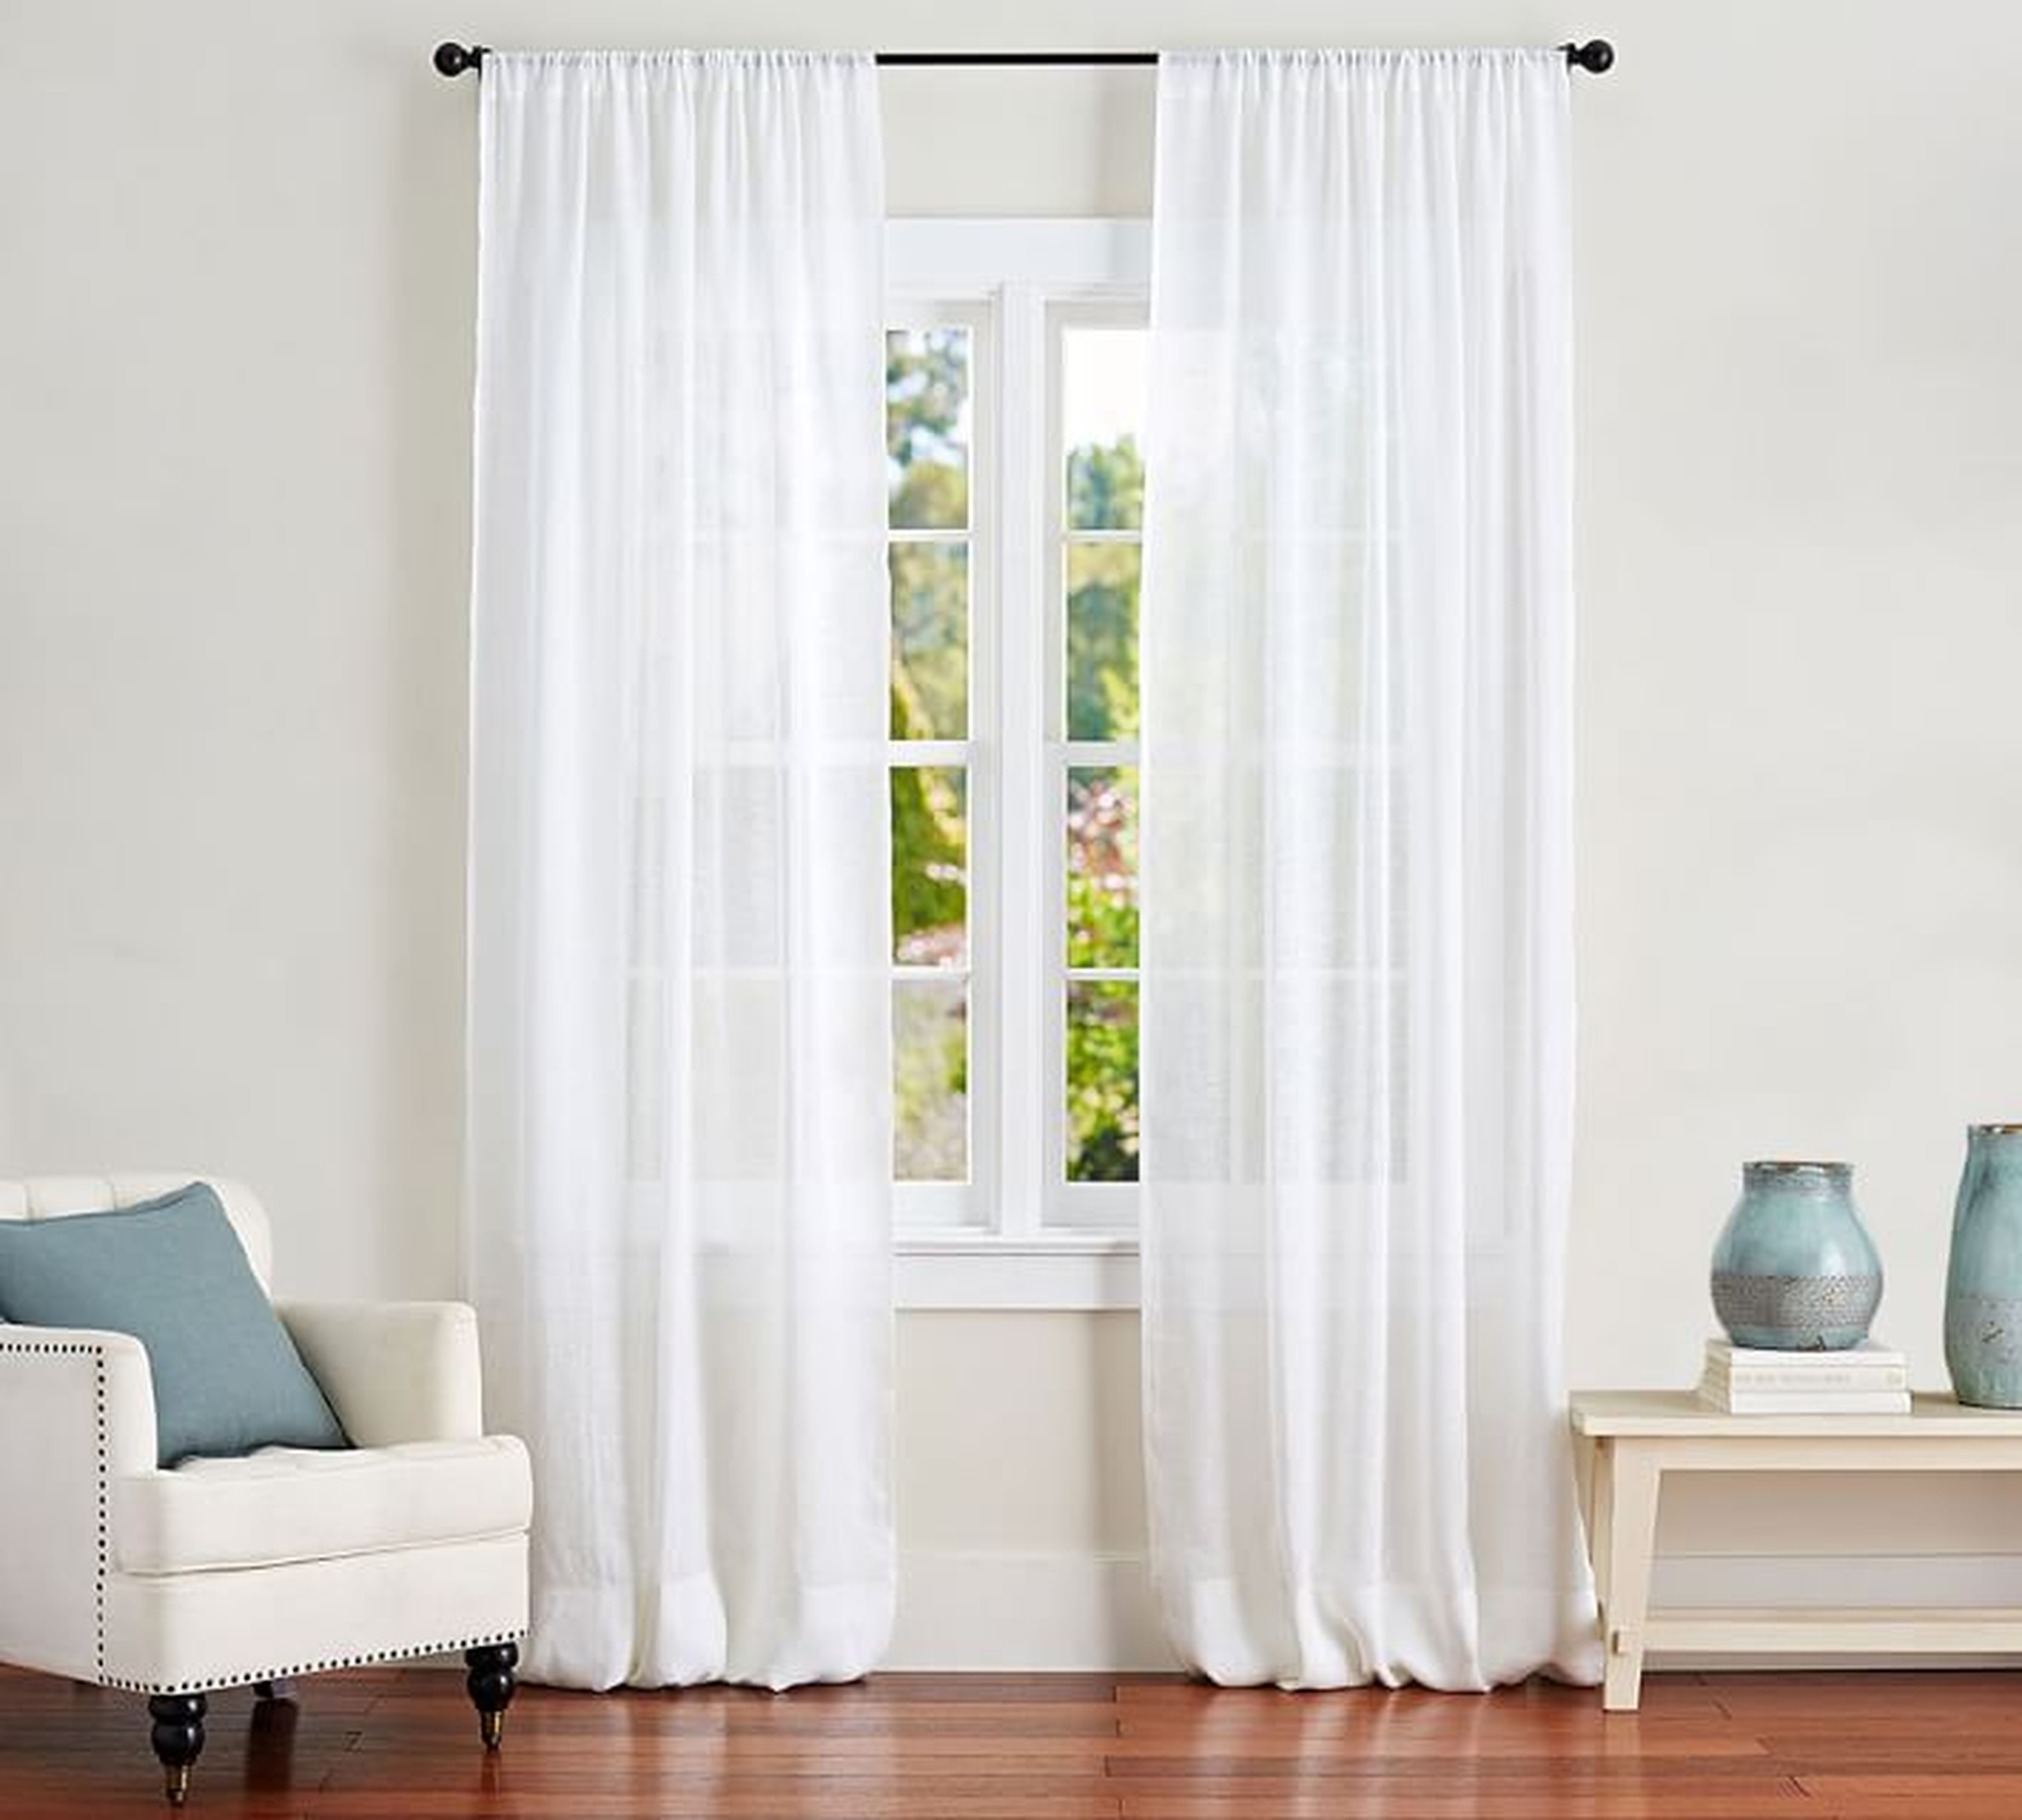 Belgian Linen Rod Pocket Sheer Curtain Made with Libeco(TM) Linen, 50 x 108", White - Pottery Barn